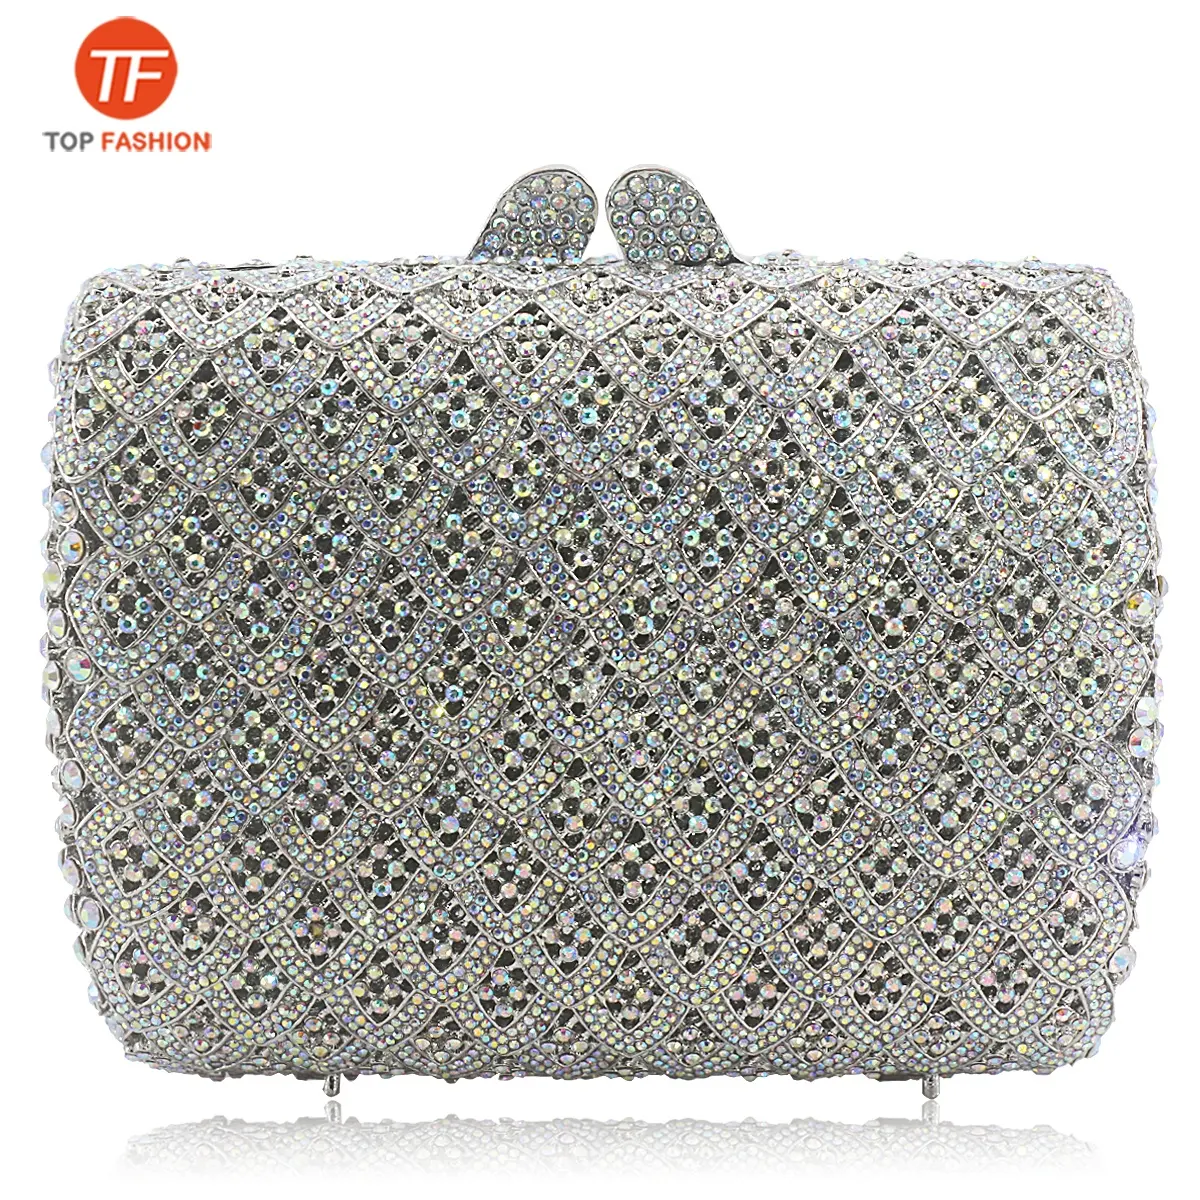 China Factory Wholesales Crystal Rhinestone Clutch Evening Bag for Formal Party Colorful Clutch Purse